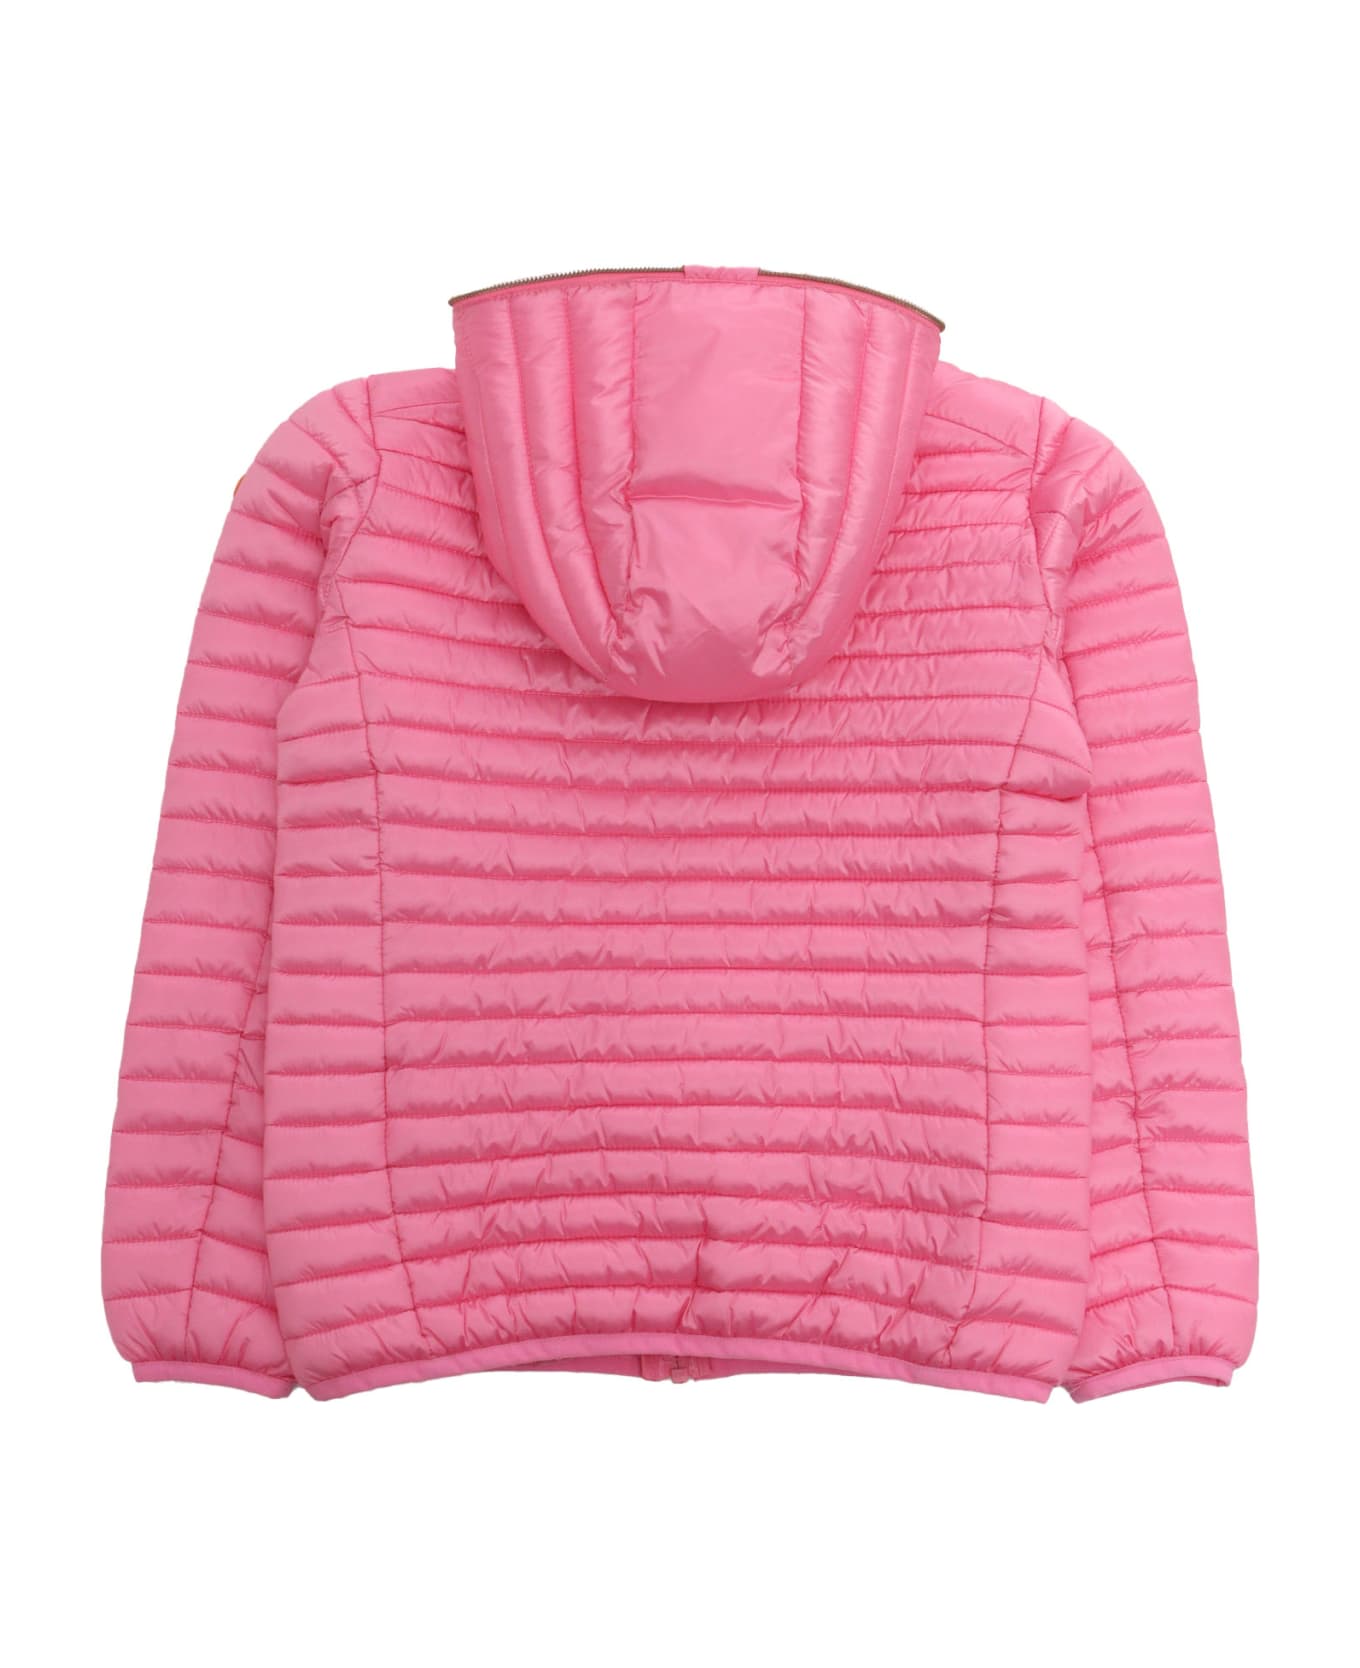 Save the Duck Rosy Pink Down Jacket - PINK